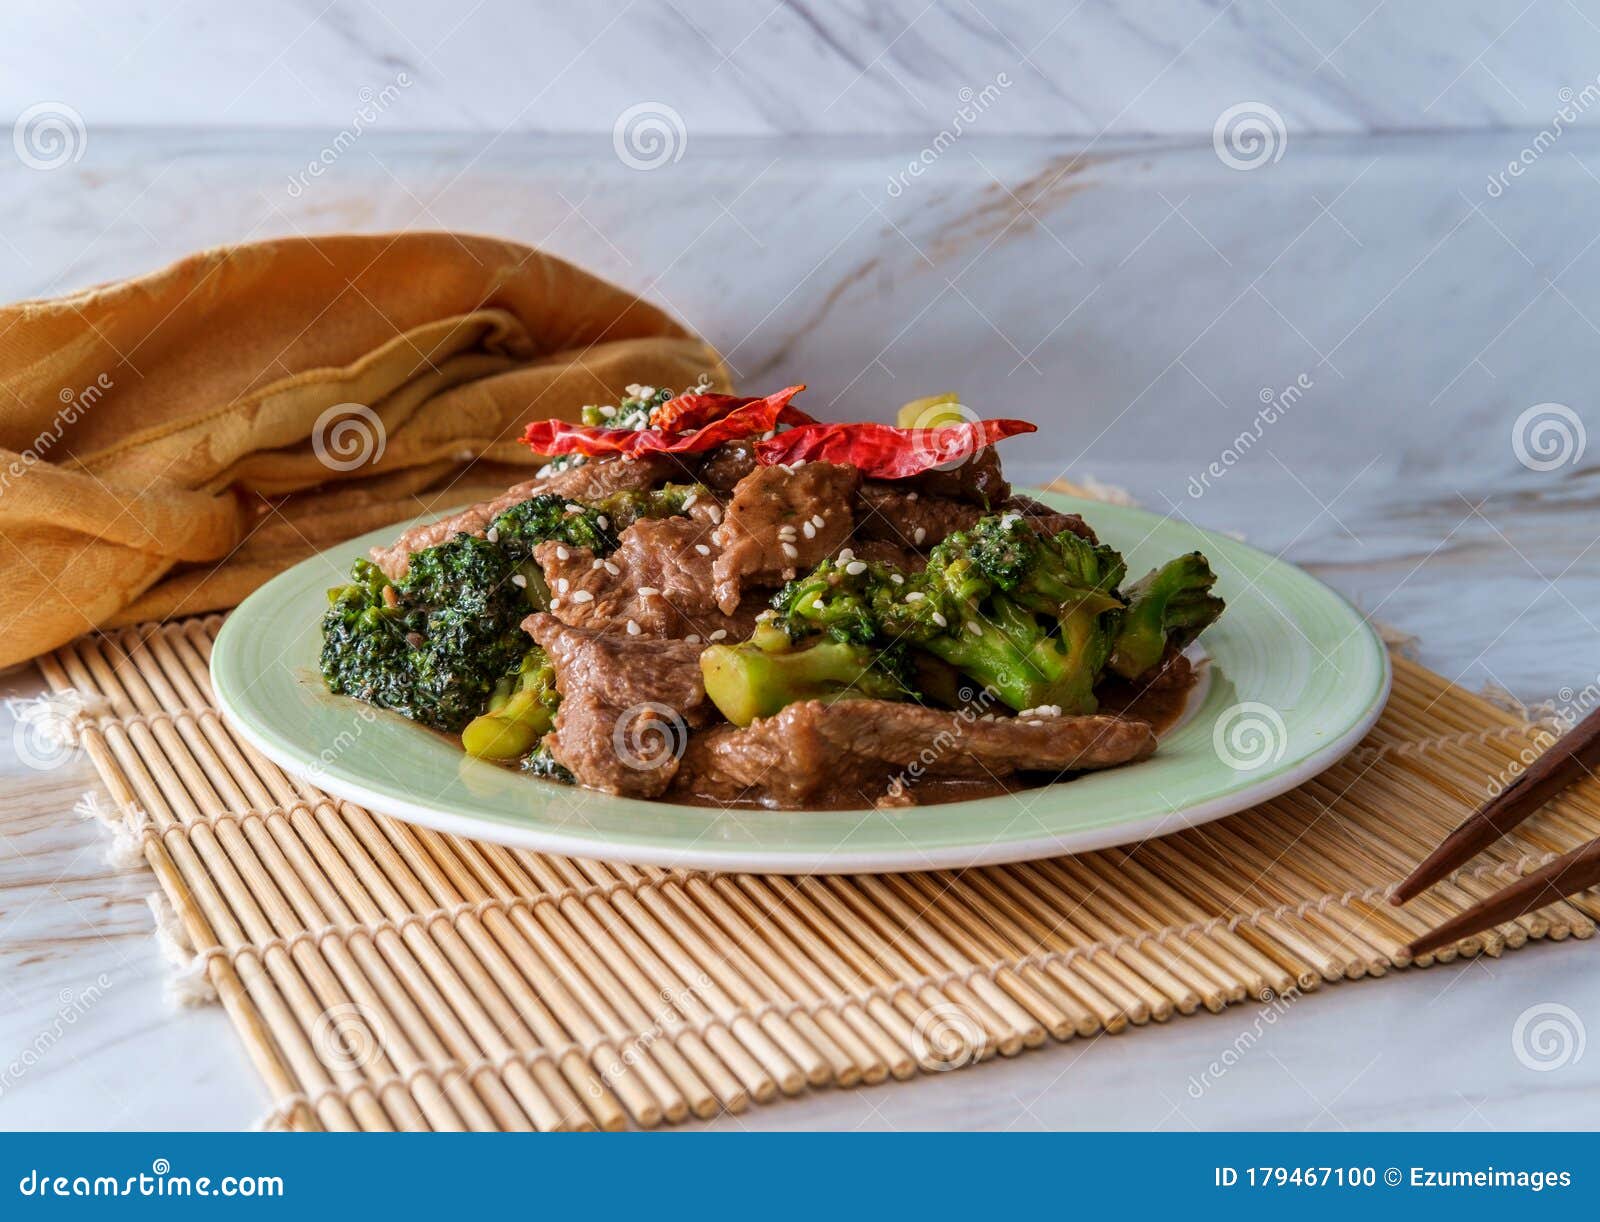 Szechuan Beef and Broccoli stock photo. Image of spicy - 179467100